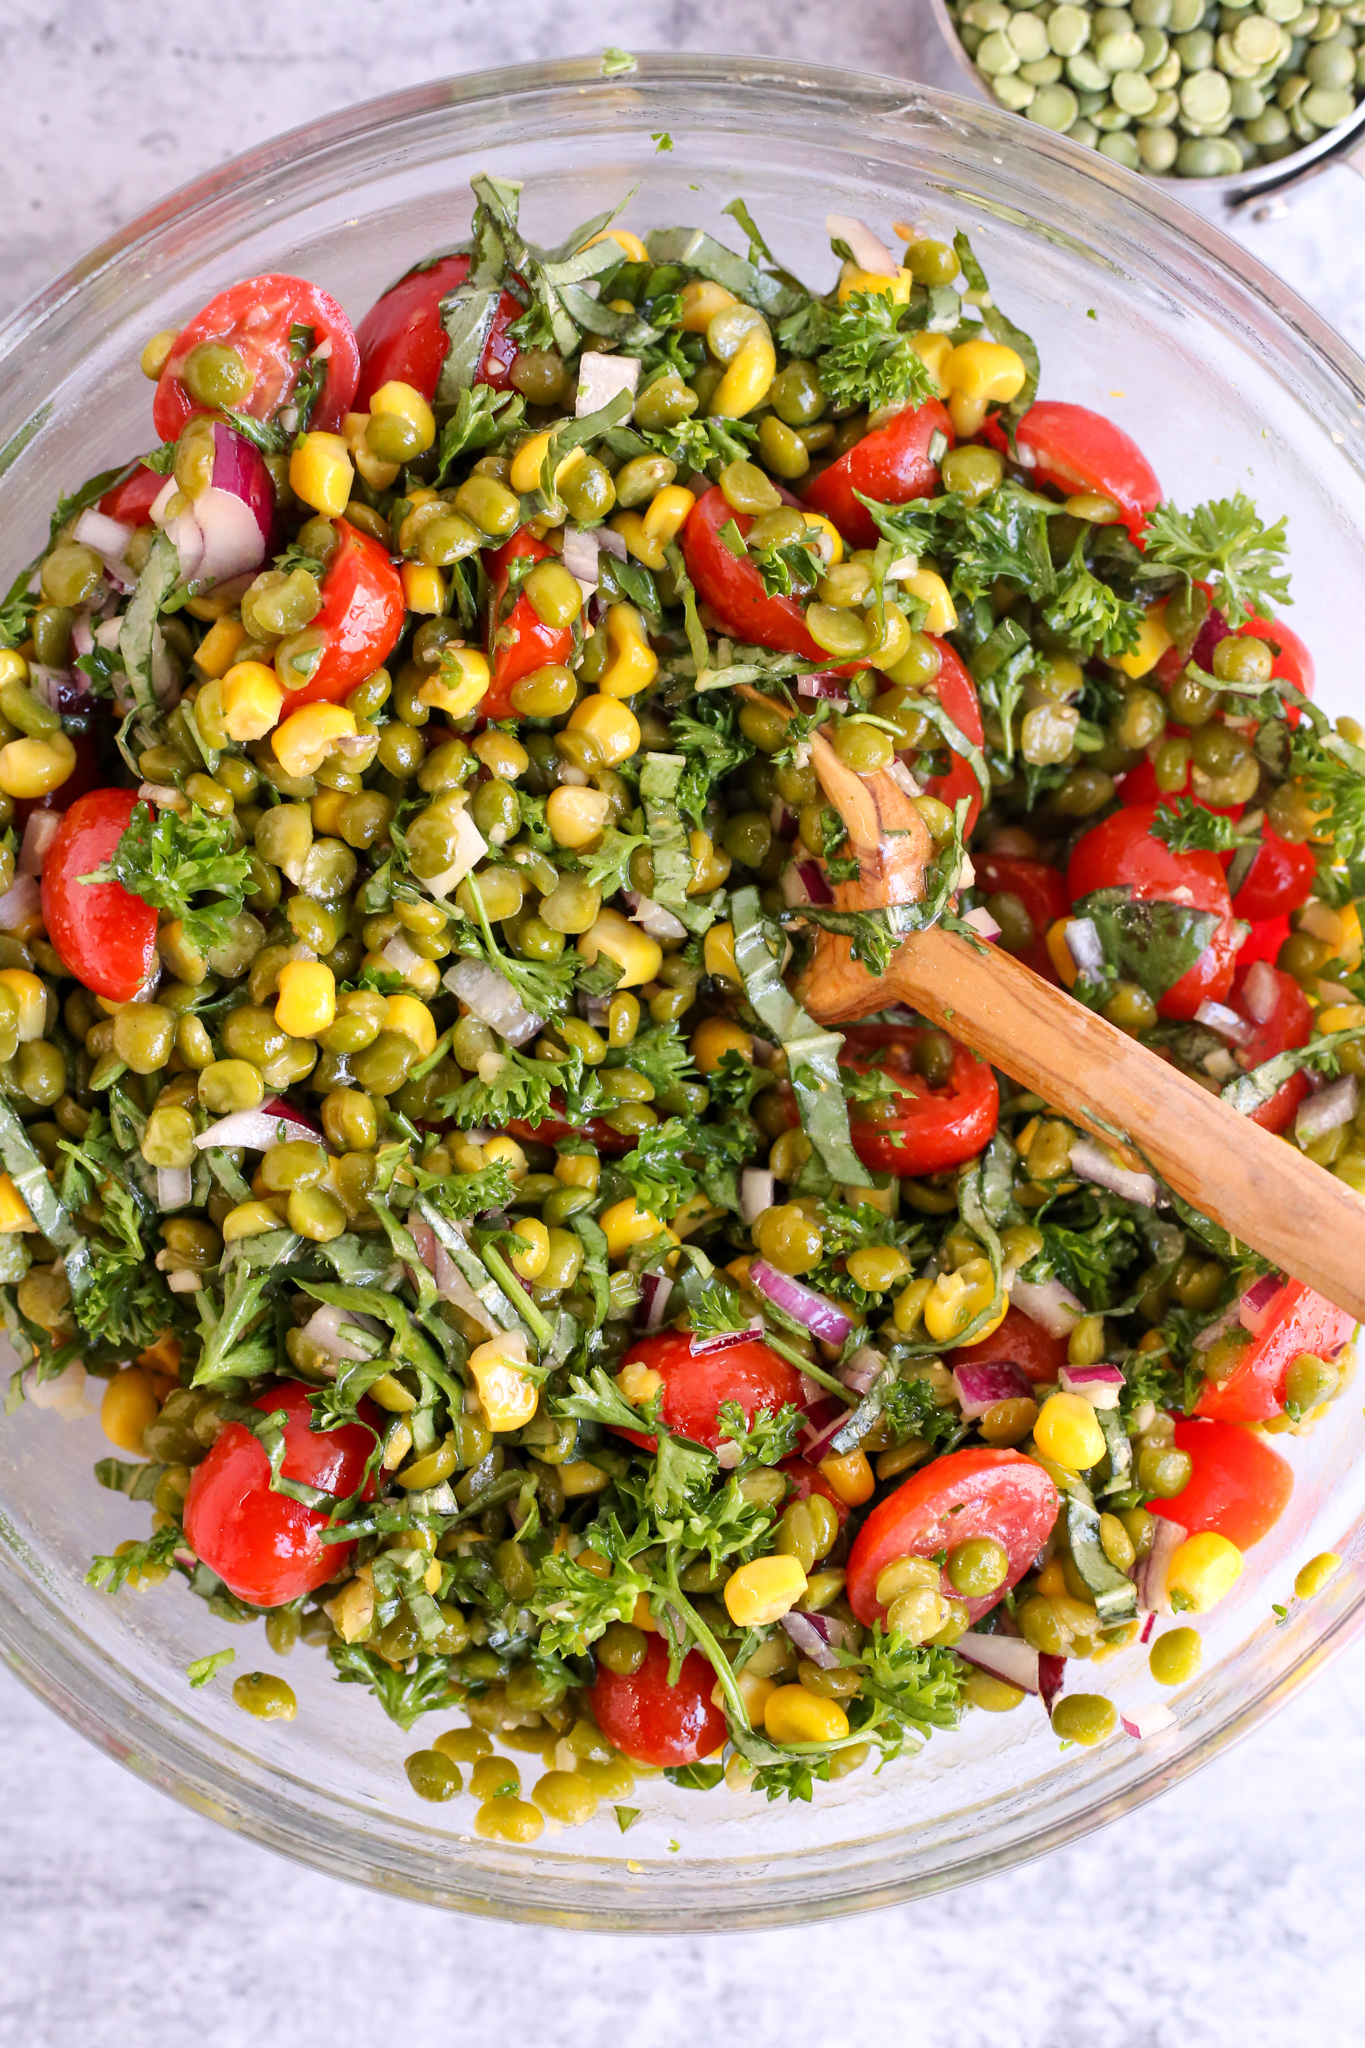 Large glass mixing bowl filled with a summer split pea salad recipe